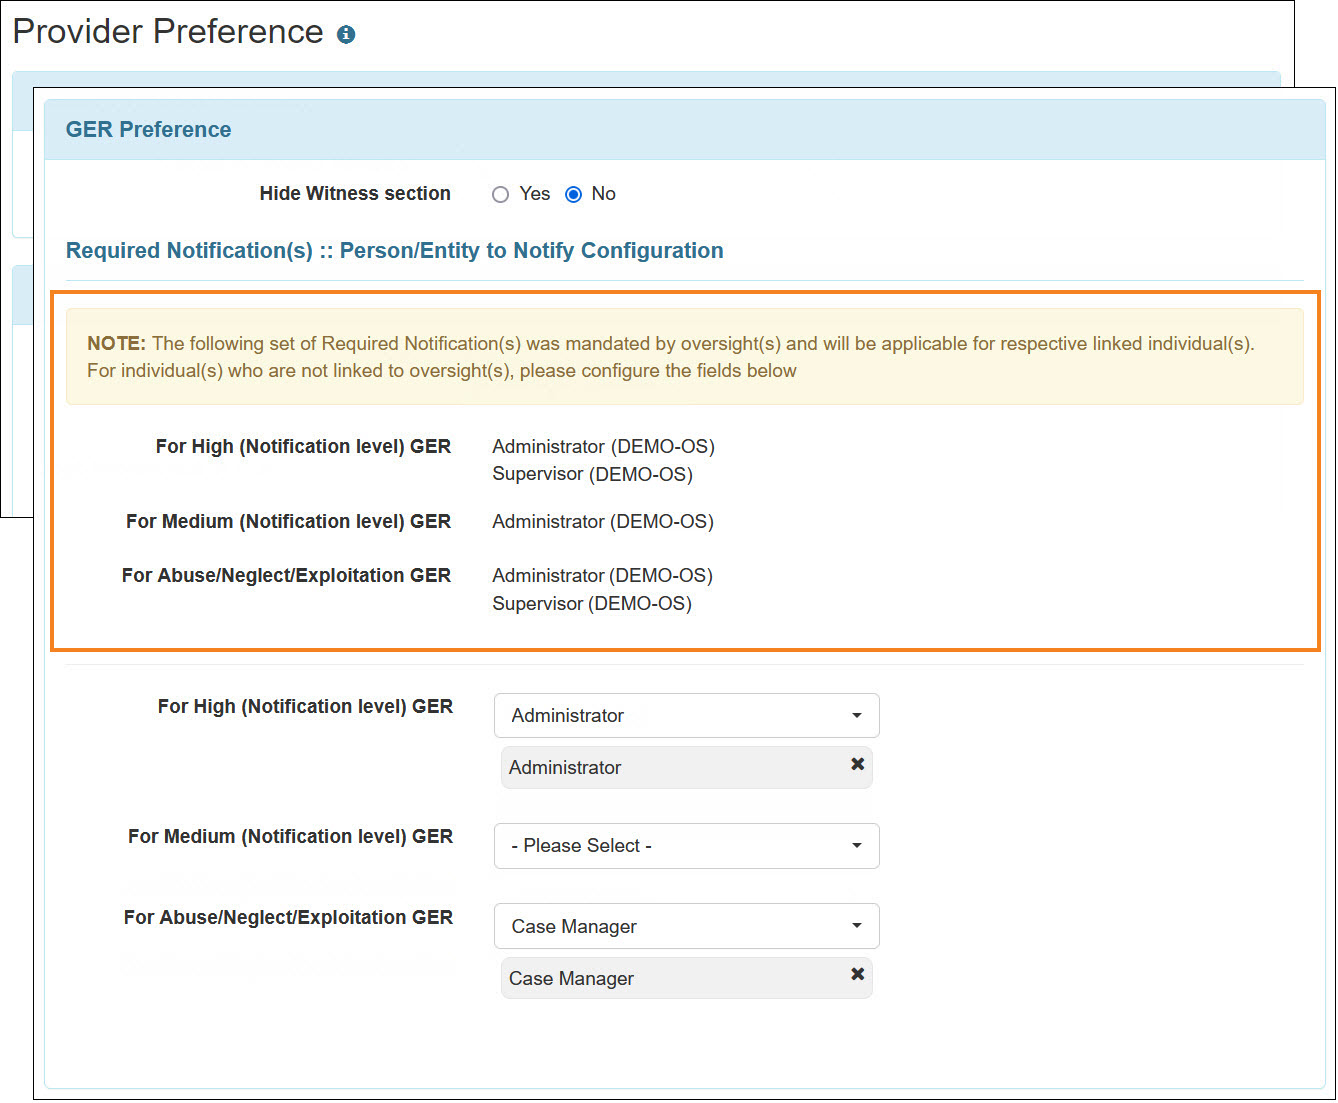 Screenshot showing the Provider Prefernce Configuration page where OS configuration for GER notification is showing.